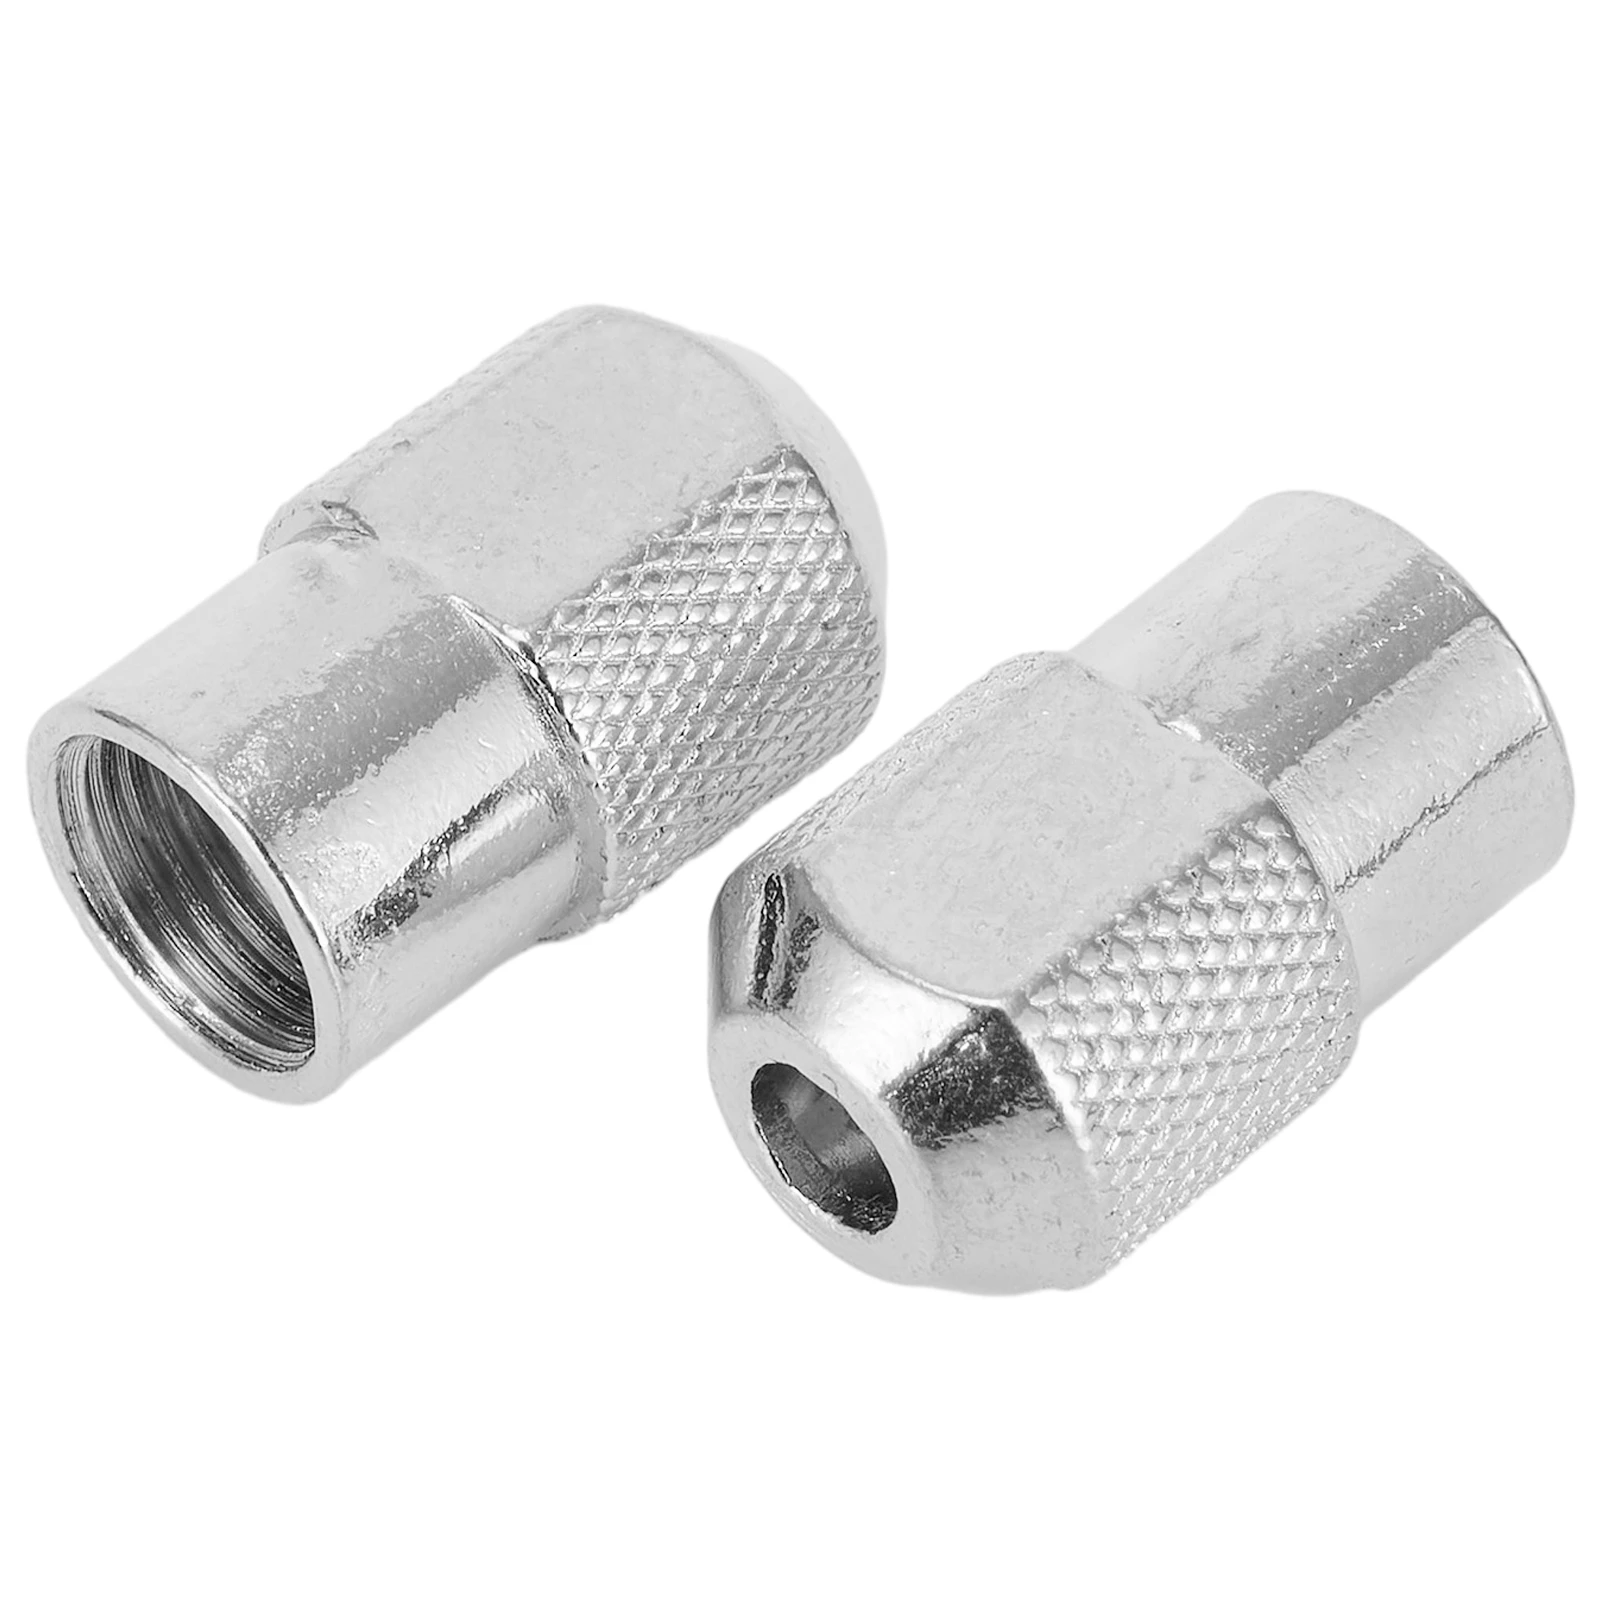 5pcs M8X0.75mm Drill Chuck Electric Mill Shaft Screw Cap Nut Collet For Electric Mill Grinder Shaft Rotary Tool Power Tools Acce 5 pack mini drill chuck m8x0 75mm zinc alloy chuck nut rotary tool accessories electric grinder thread 8 0 75mm tool